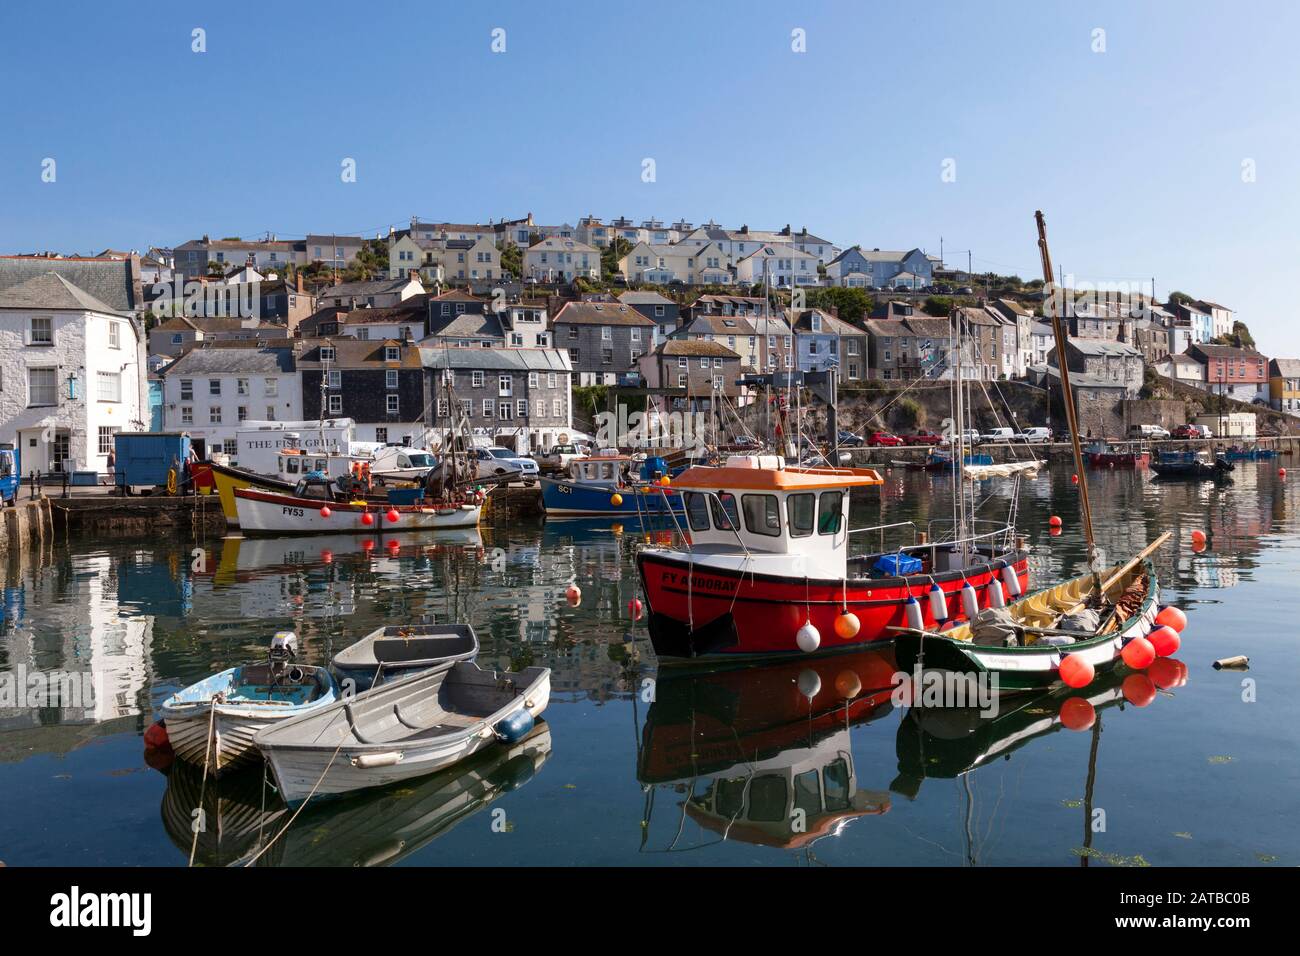 The Harbour in Mevagissey, Cornwall, England, U.K. Stock Photo